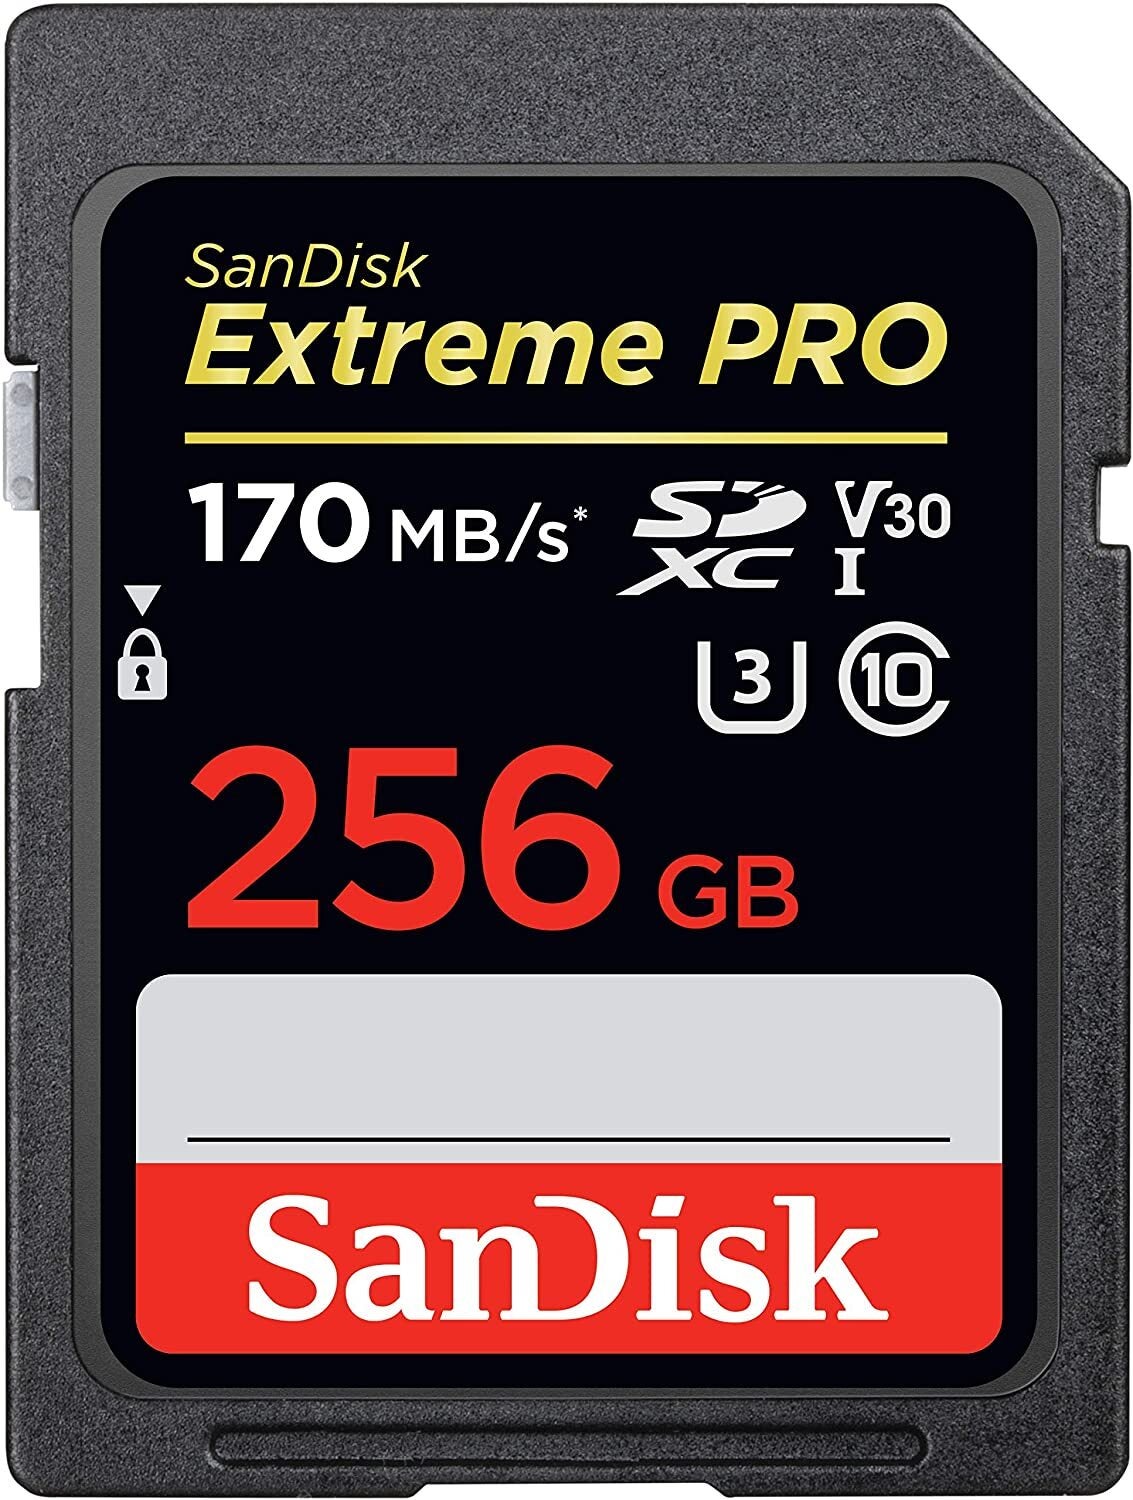 SanDisk Extreme Pro 256GB SD Card SDSDXXY-256G